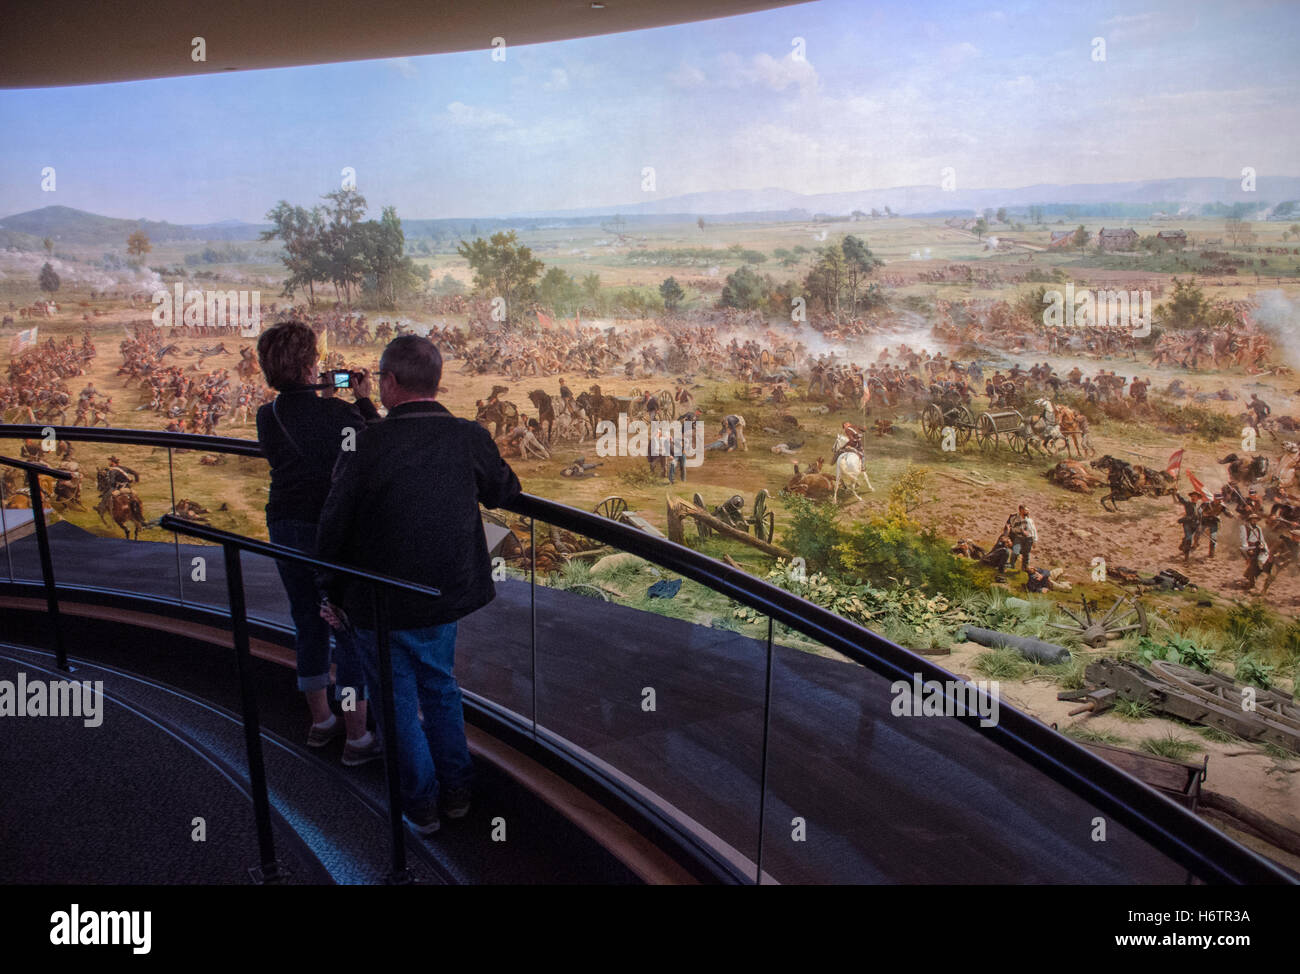 The Gettysburg Cyclorama  is a 360 degree painting depicting Pickett's Charge at the Battle of Gettysburg on July 3, 1863. Stock Photo